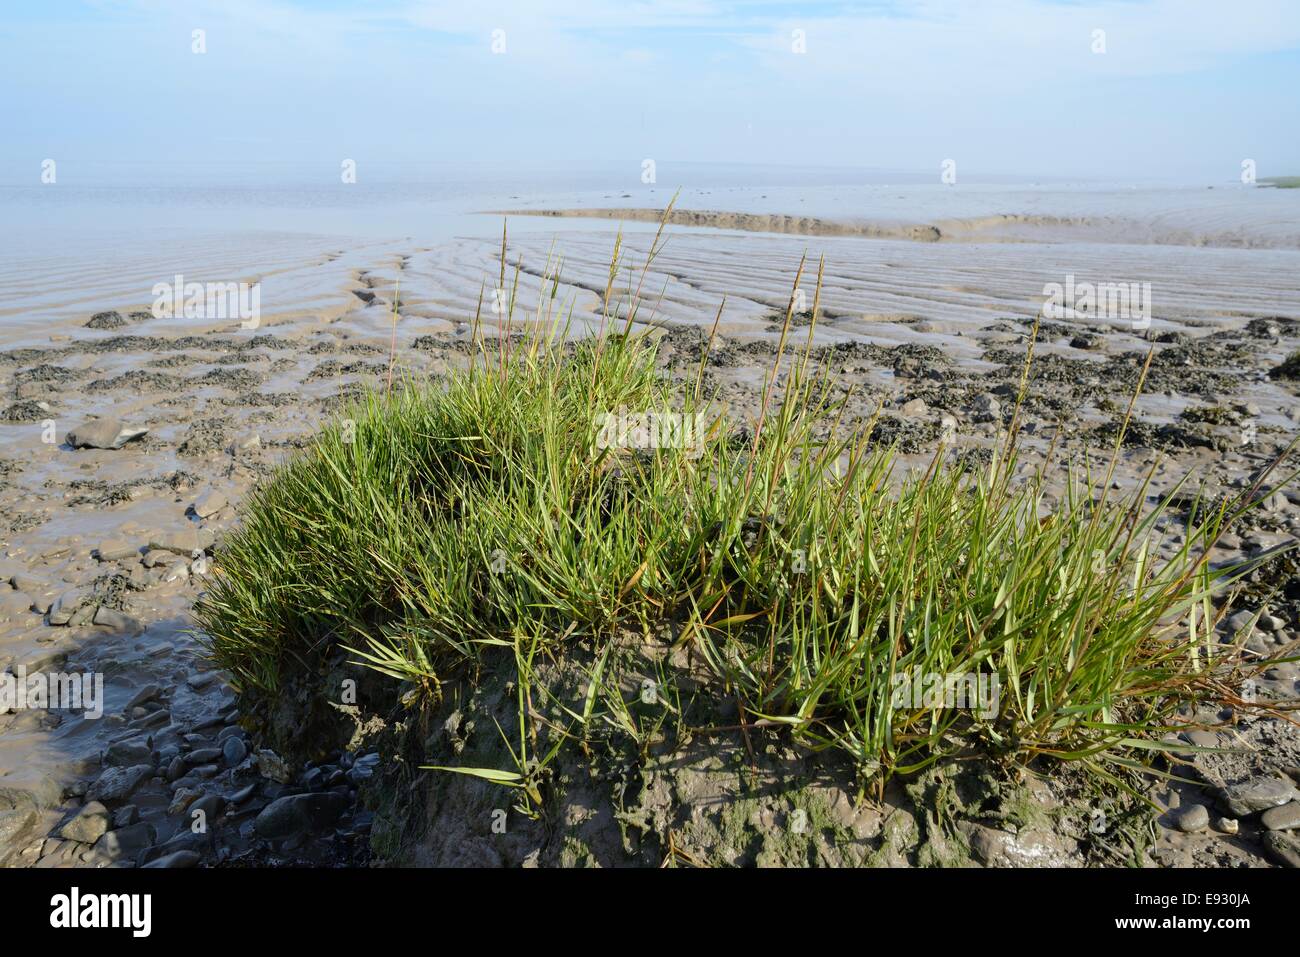 Saltmarsh mud on the Severn estuary stabilised by flowering Spartina / Cord grass (Spartina anglica), Somerset, UK, September. Stock Photo